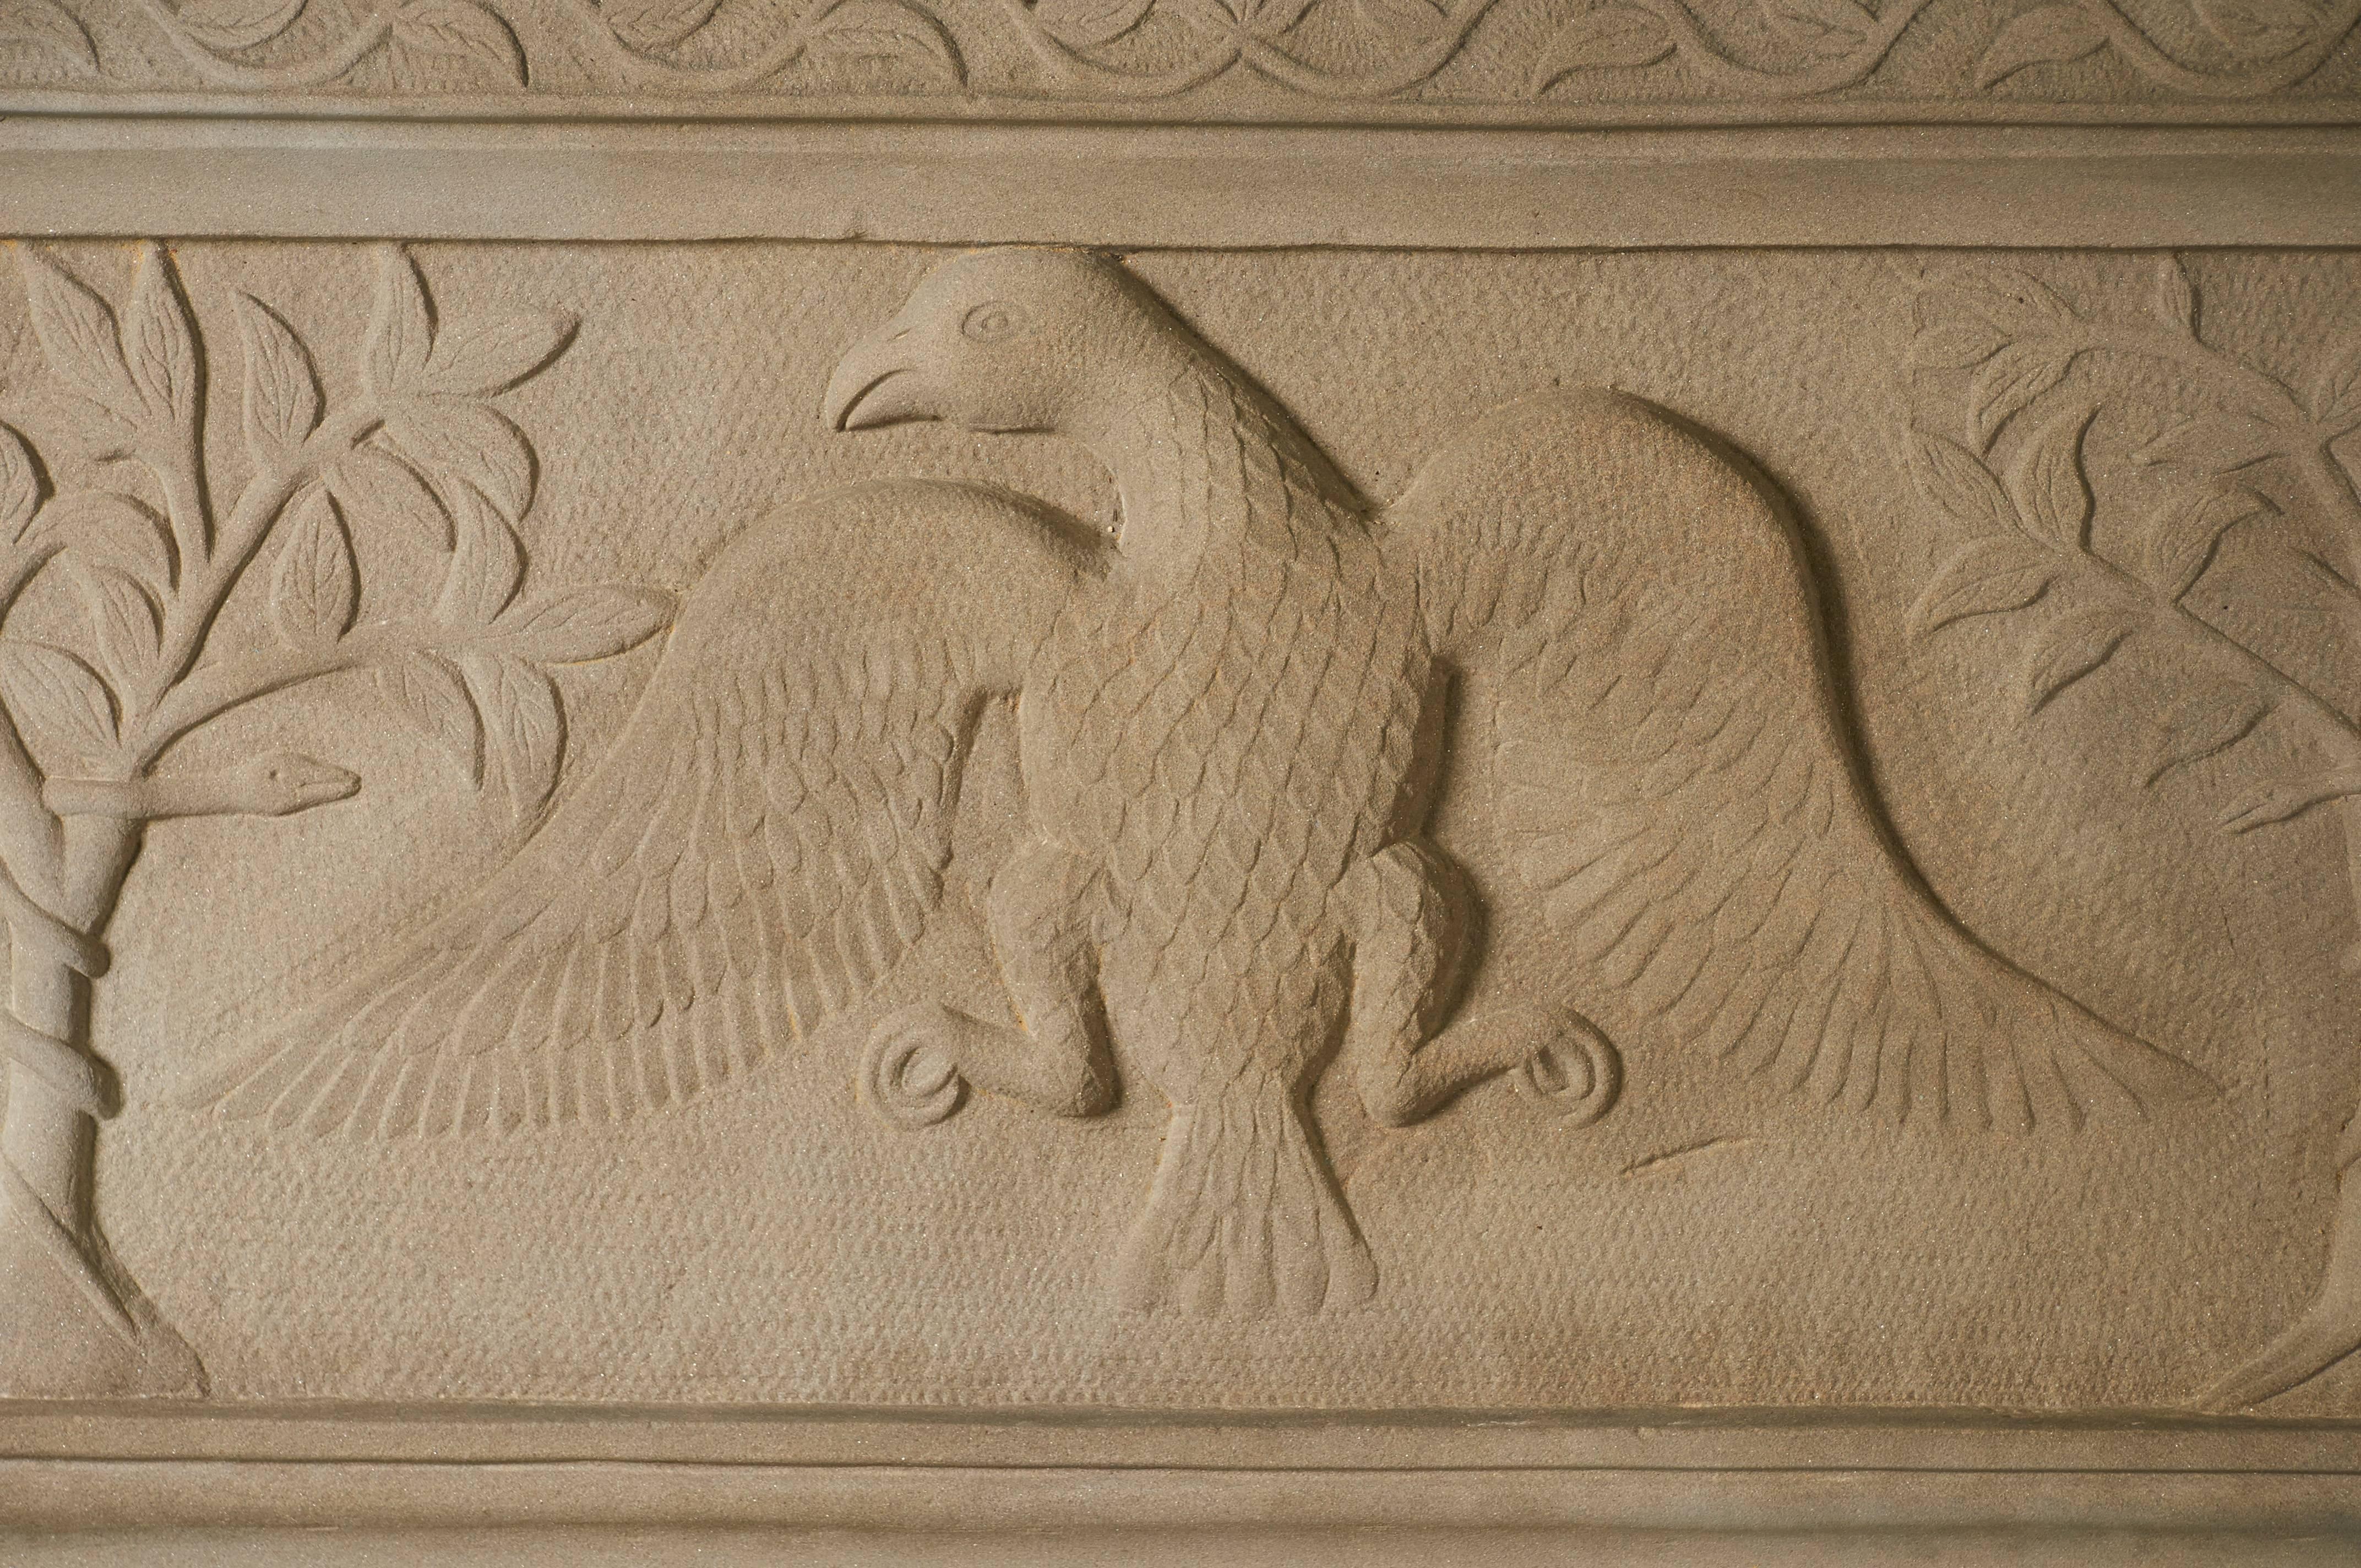 A carved sandstone mantel from Oak Dale Farm in Cadiz, Ohio, built by Robert Reid Cochran (1771-1861), one of the first settlers in Harrison County. Cochran built a brick residence on the property surrounding his mill in the 1820s which included